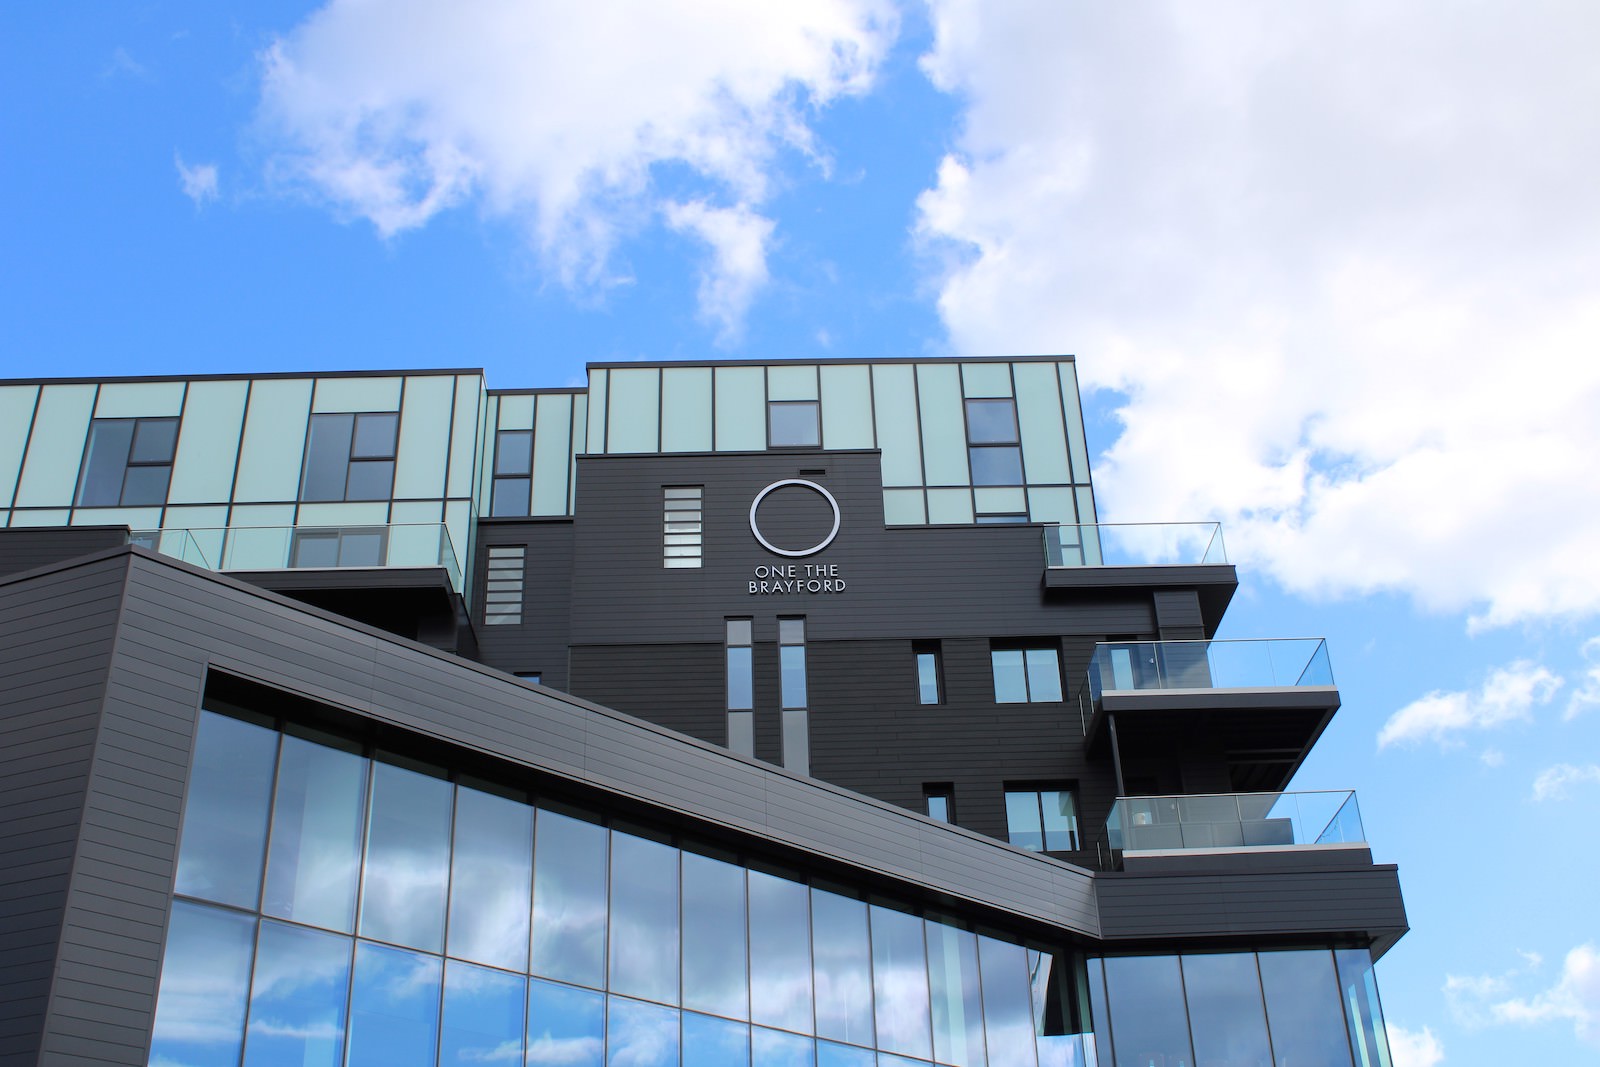 external view of the one the brayford building with its logo on the facade